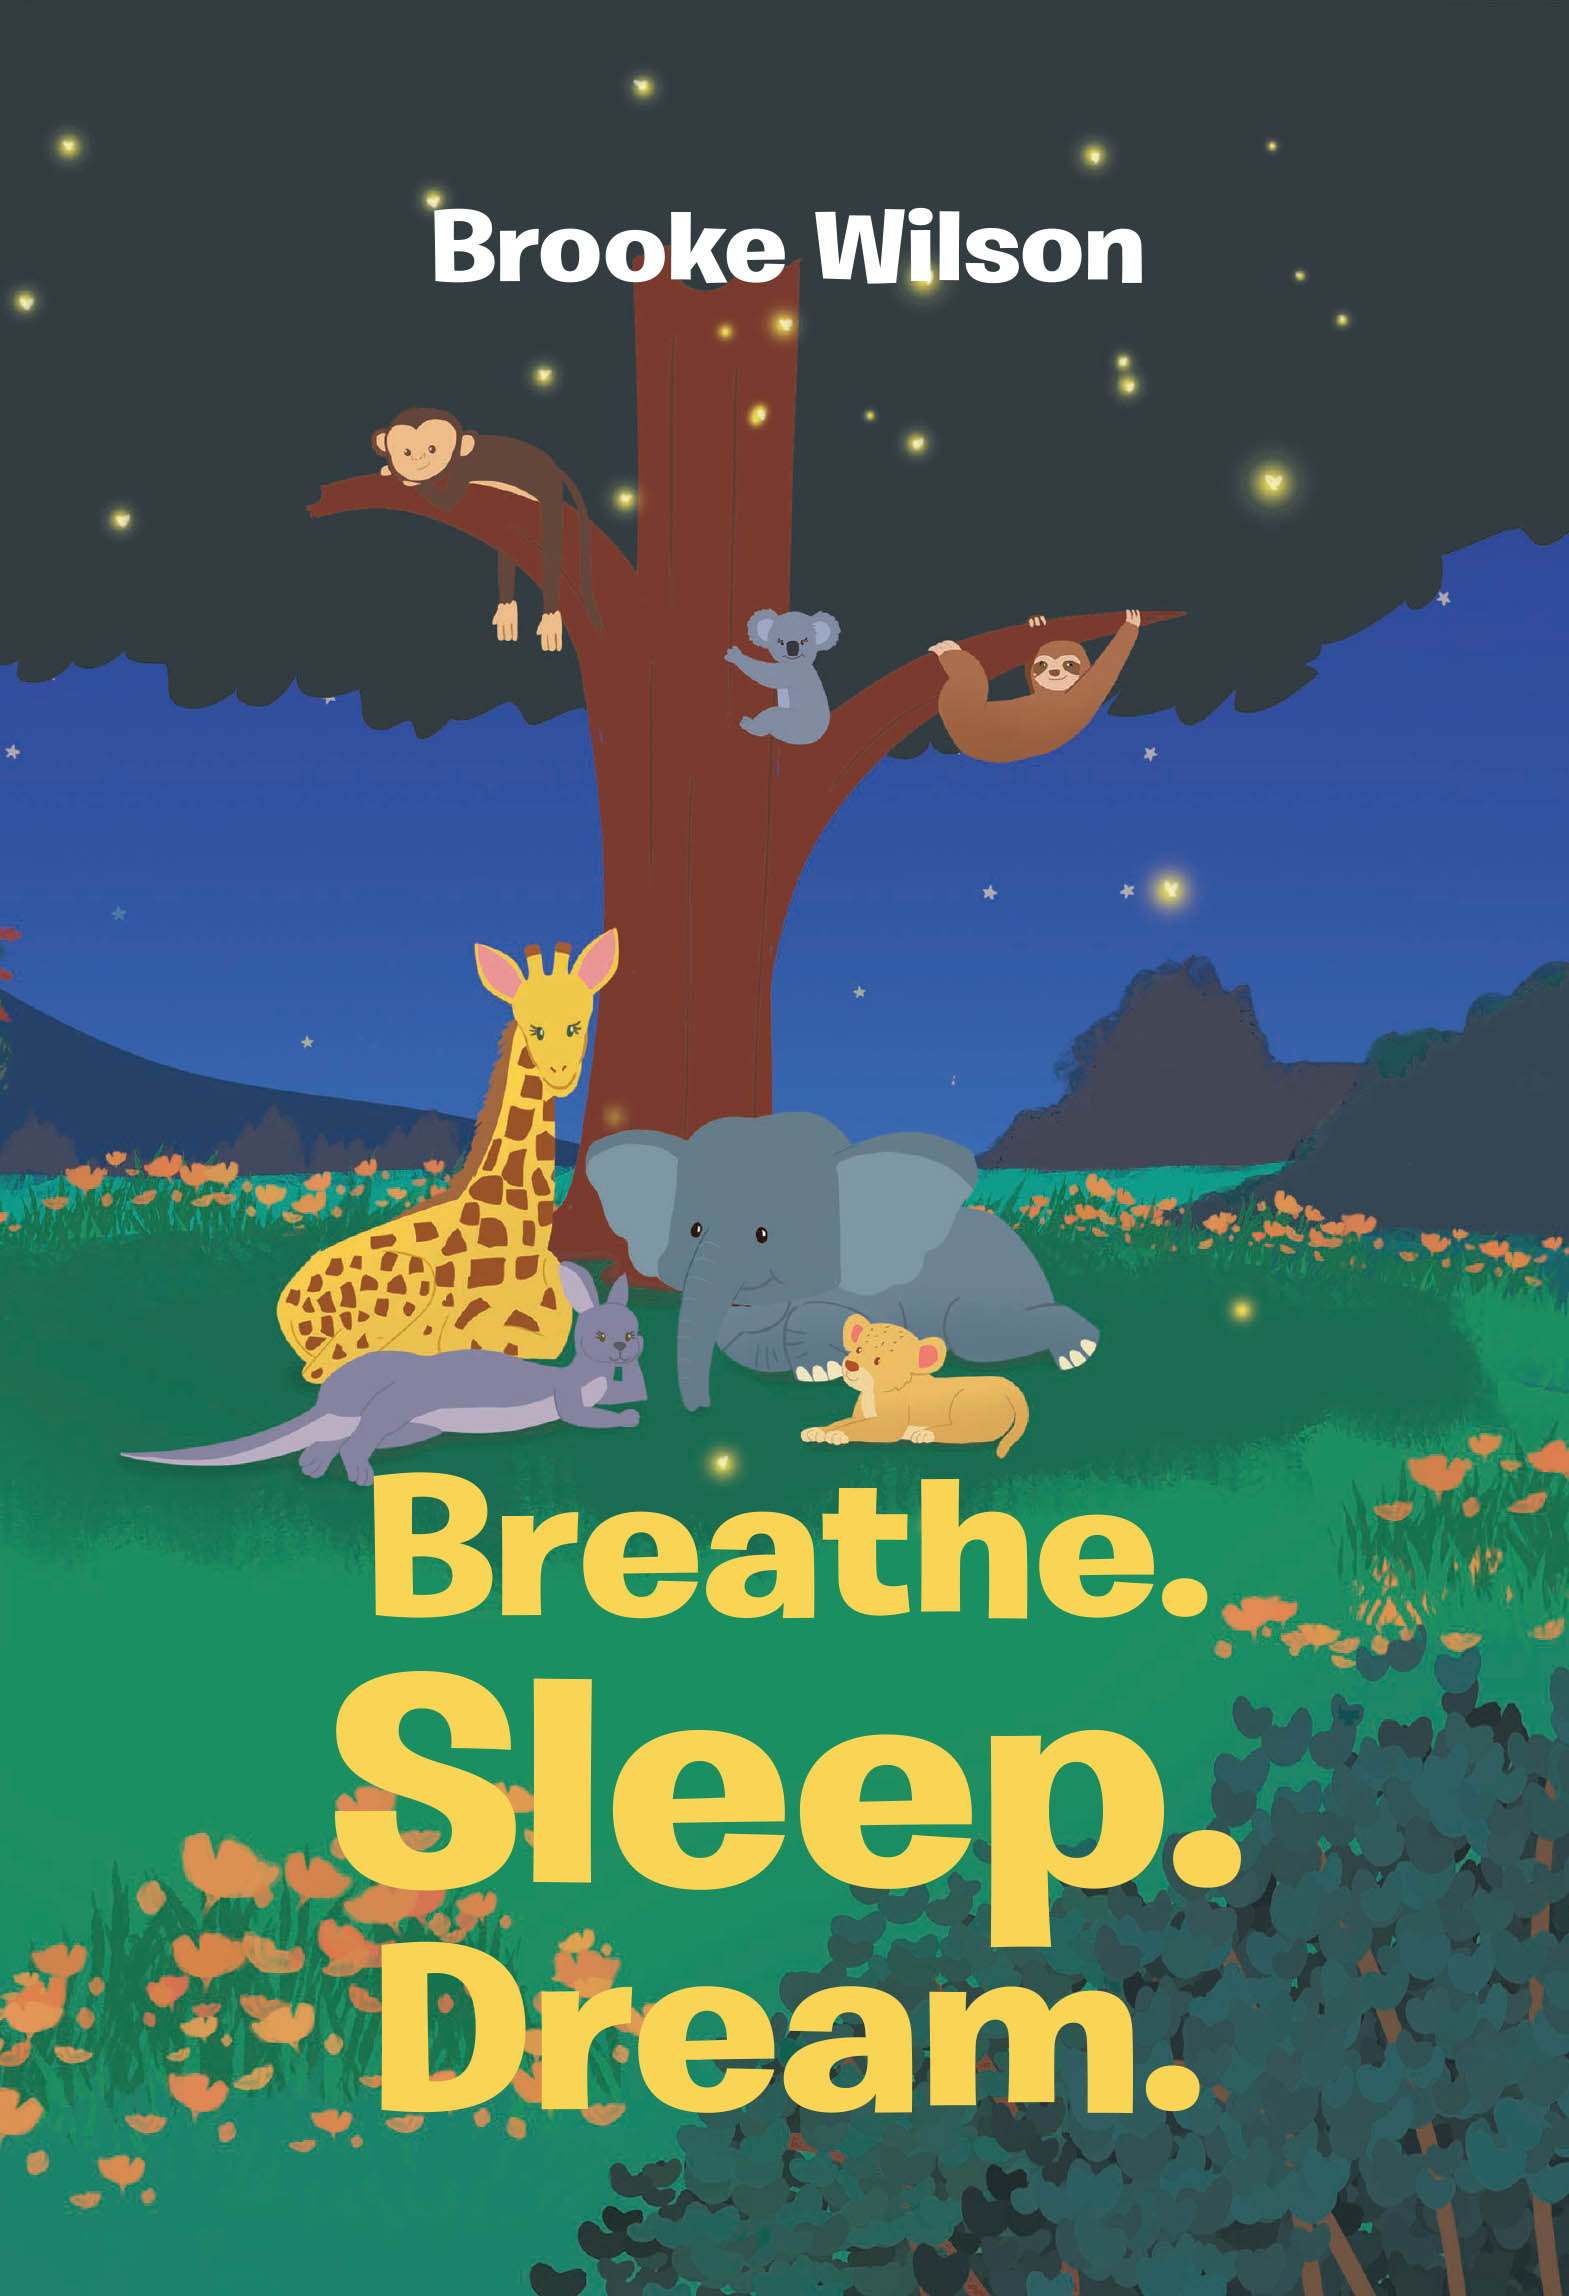 Brooke Wilson’s Newly Released "Breathe. Sleep. Dream." is a Calming Bedtime Tale That Will Aid Young Minds in Finding Peaceful Sleep